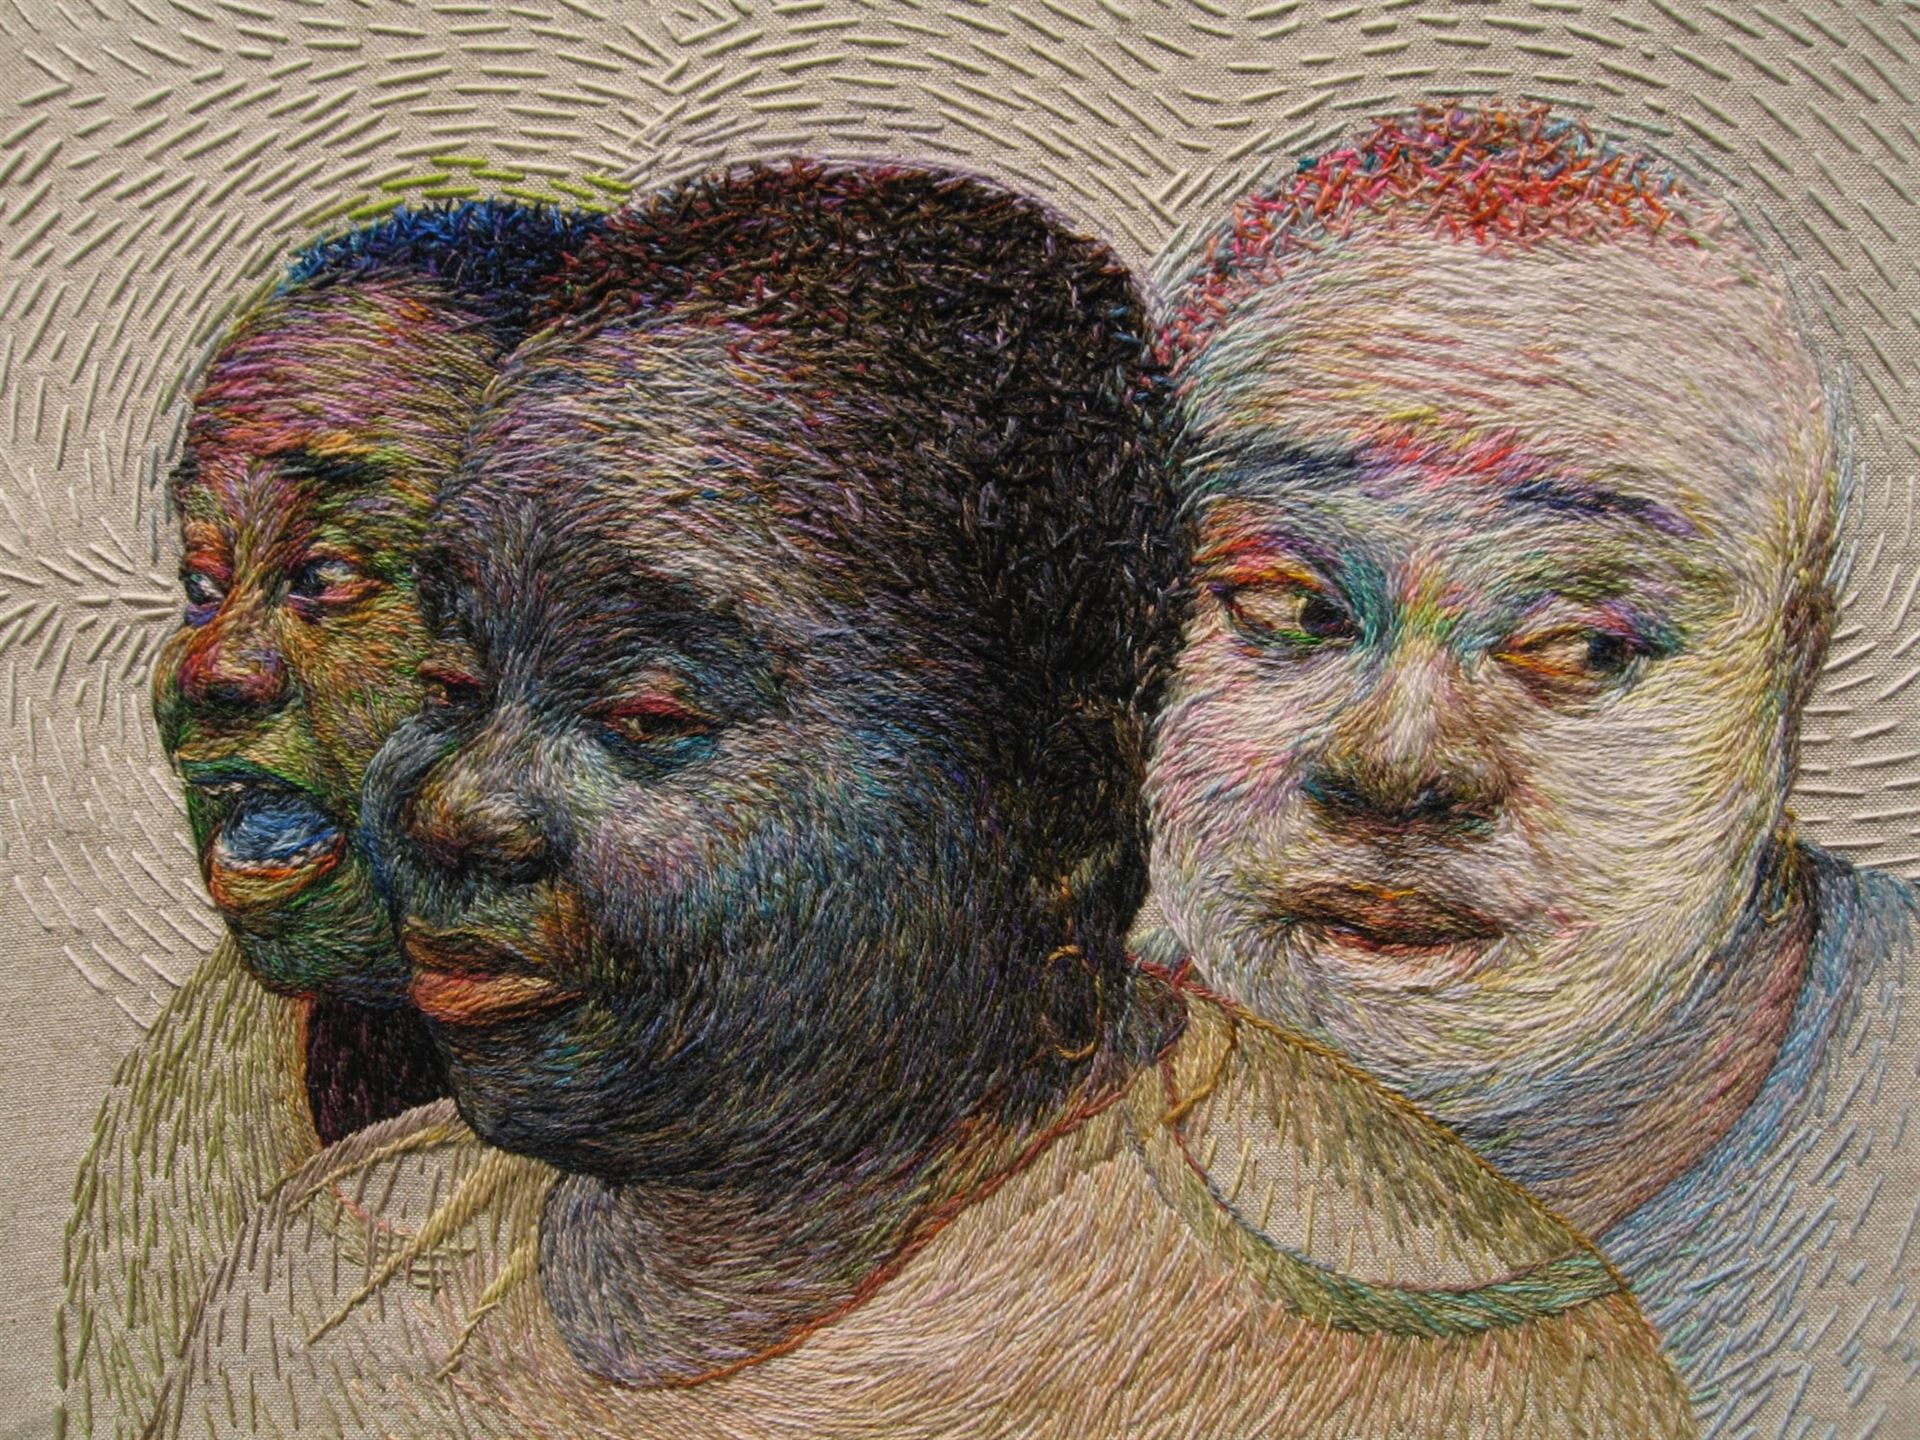 An embroidered portrait of three people